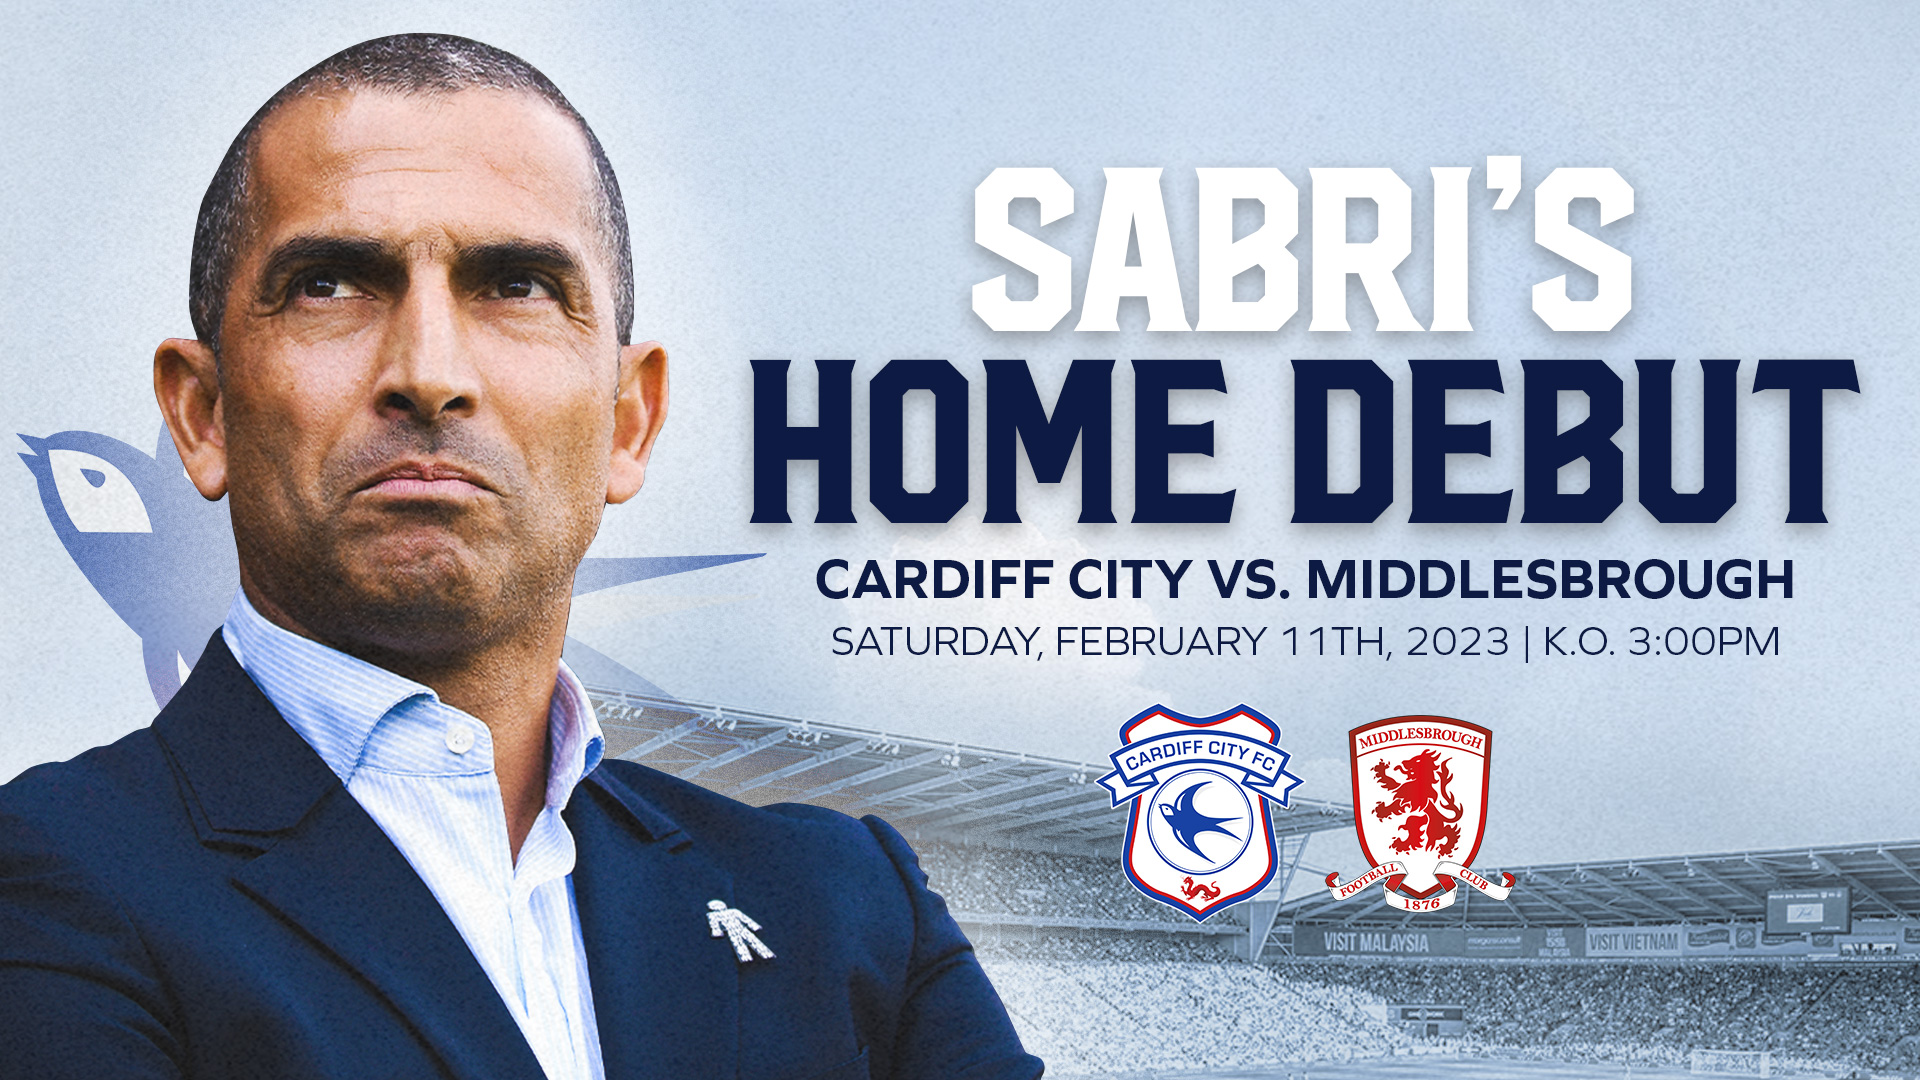 Join us for Sabri's home debut next week...